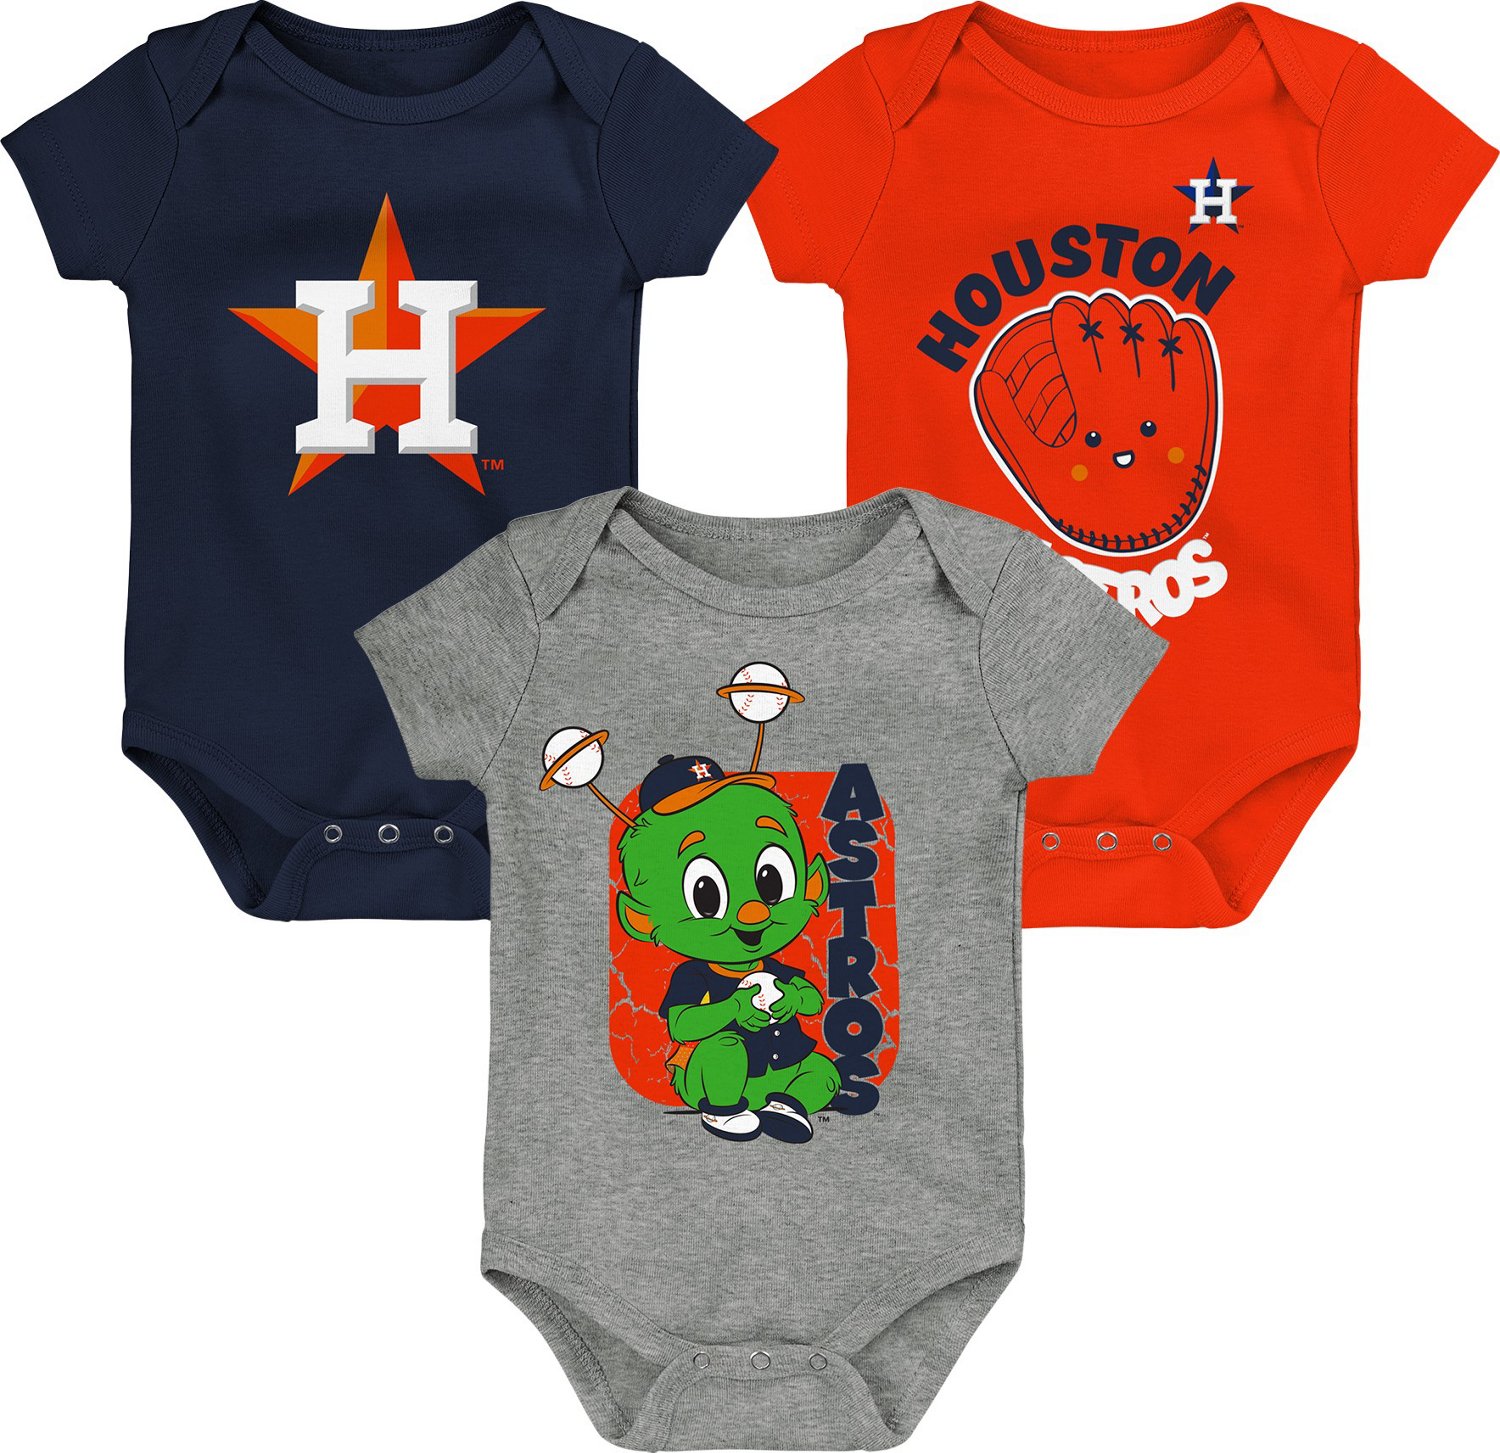 Outerstuff Infants' Houston Astros Minor League Player 3-Piece Creeper Set Navy Blue/Red, 18 Months Infant - MLB Youth at Academy Sports